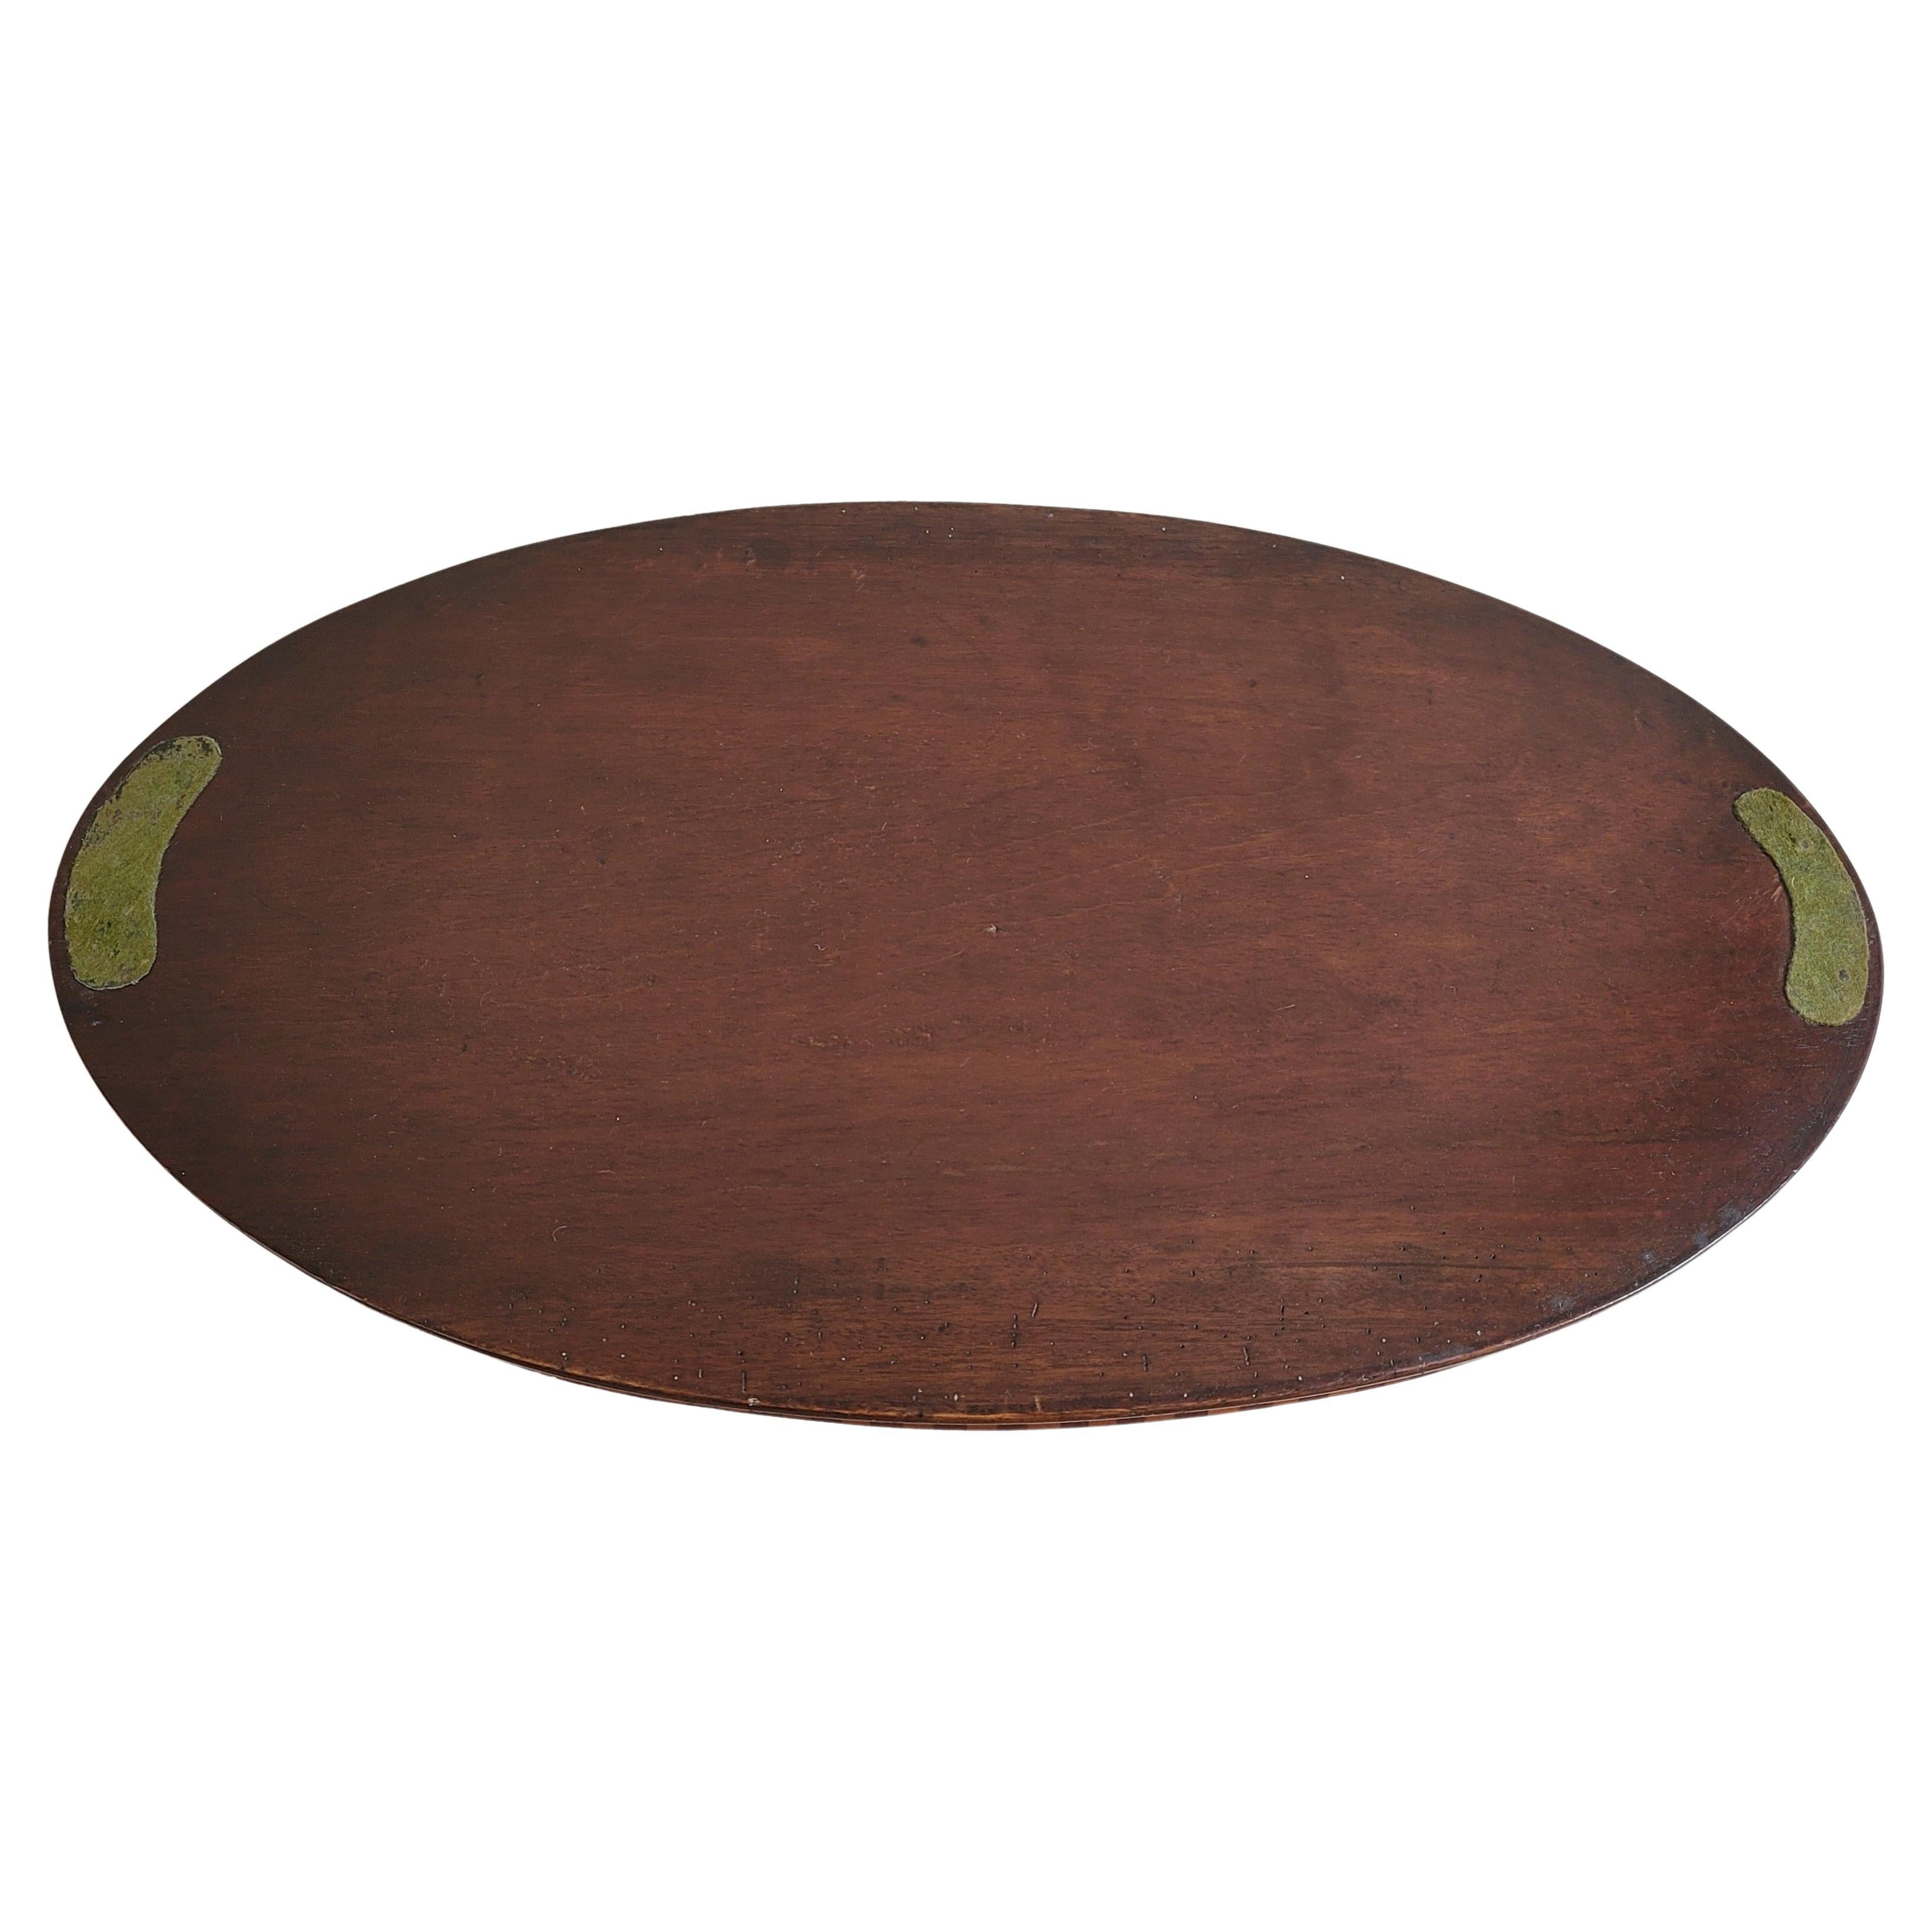 19th Century Large-Scaled, Finely Inlaid George III Victorian Mahogany Oval Butler's Tray For Sale